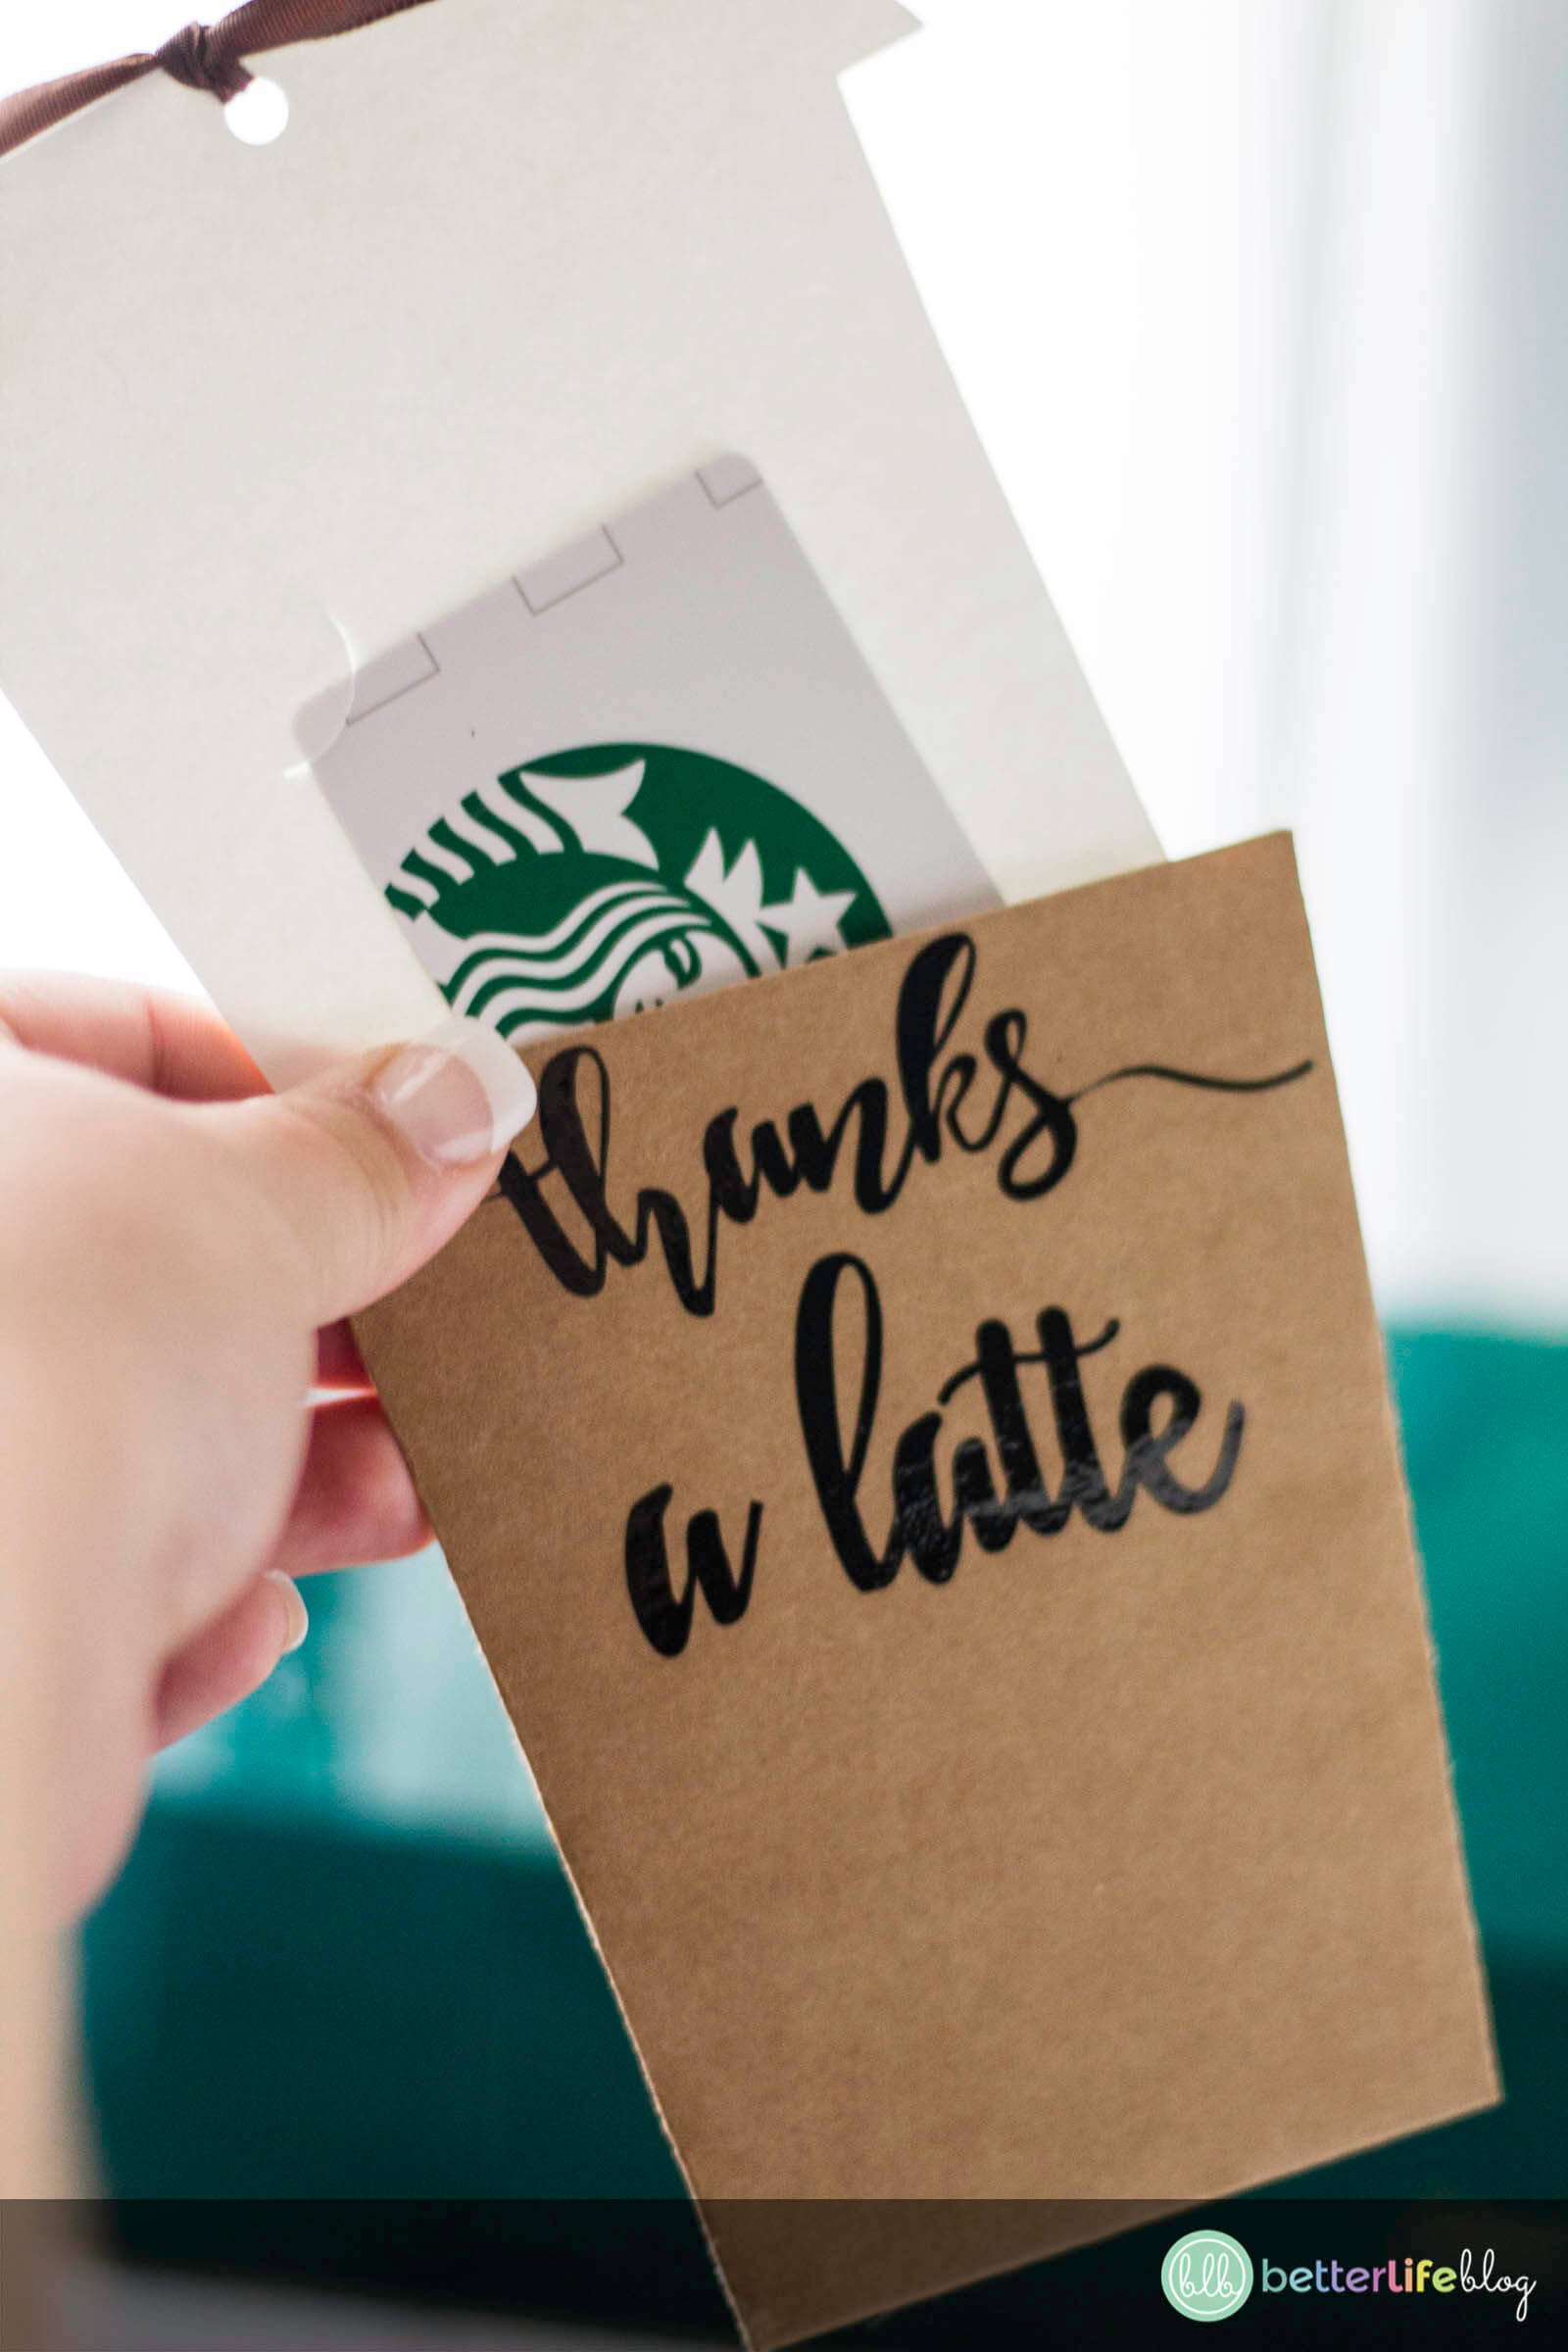 Learn how to make this Coffee Gift Card Holder in my latest post: filled with photos, clear step-by-step instructions, and my exclusive SVG file! Using your Cricut isn’t as hard as it looks! We’ll make Cricut crafting simple – together!